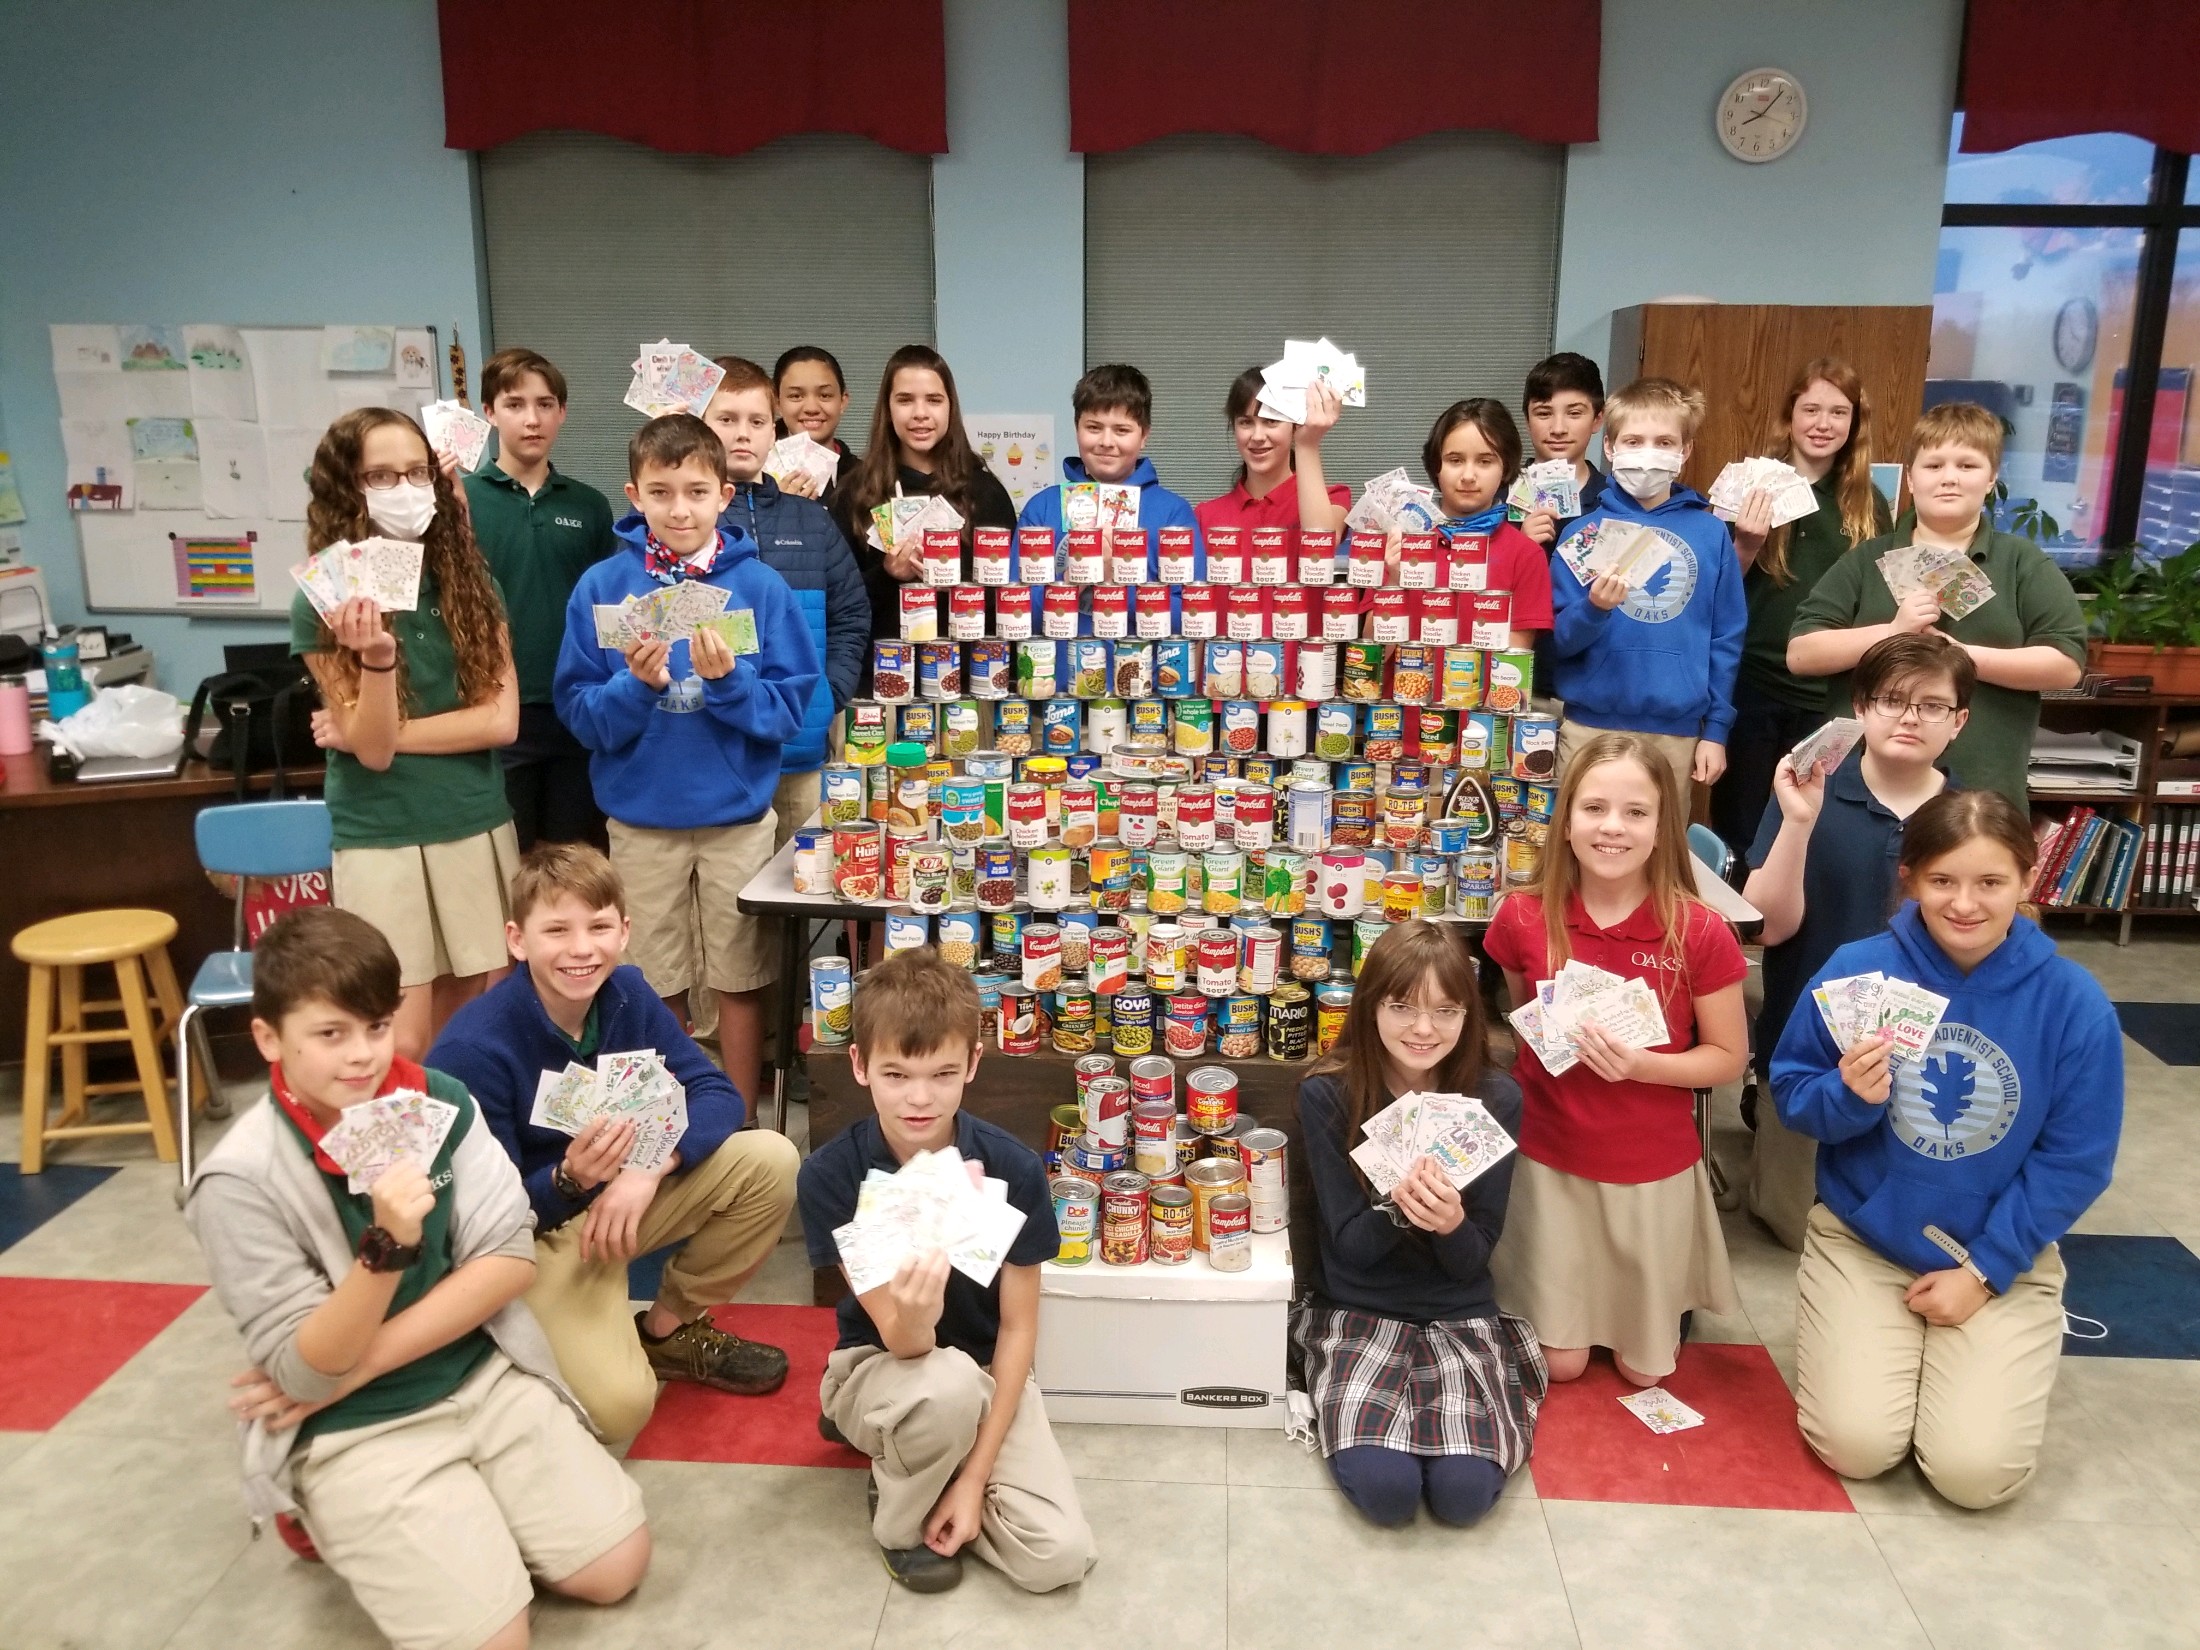 5th-6th Grade canned goods and cards